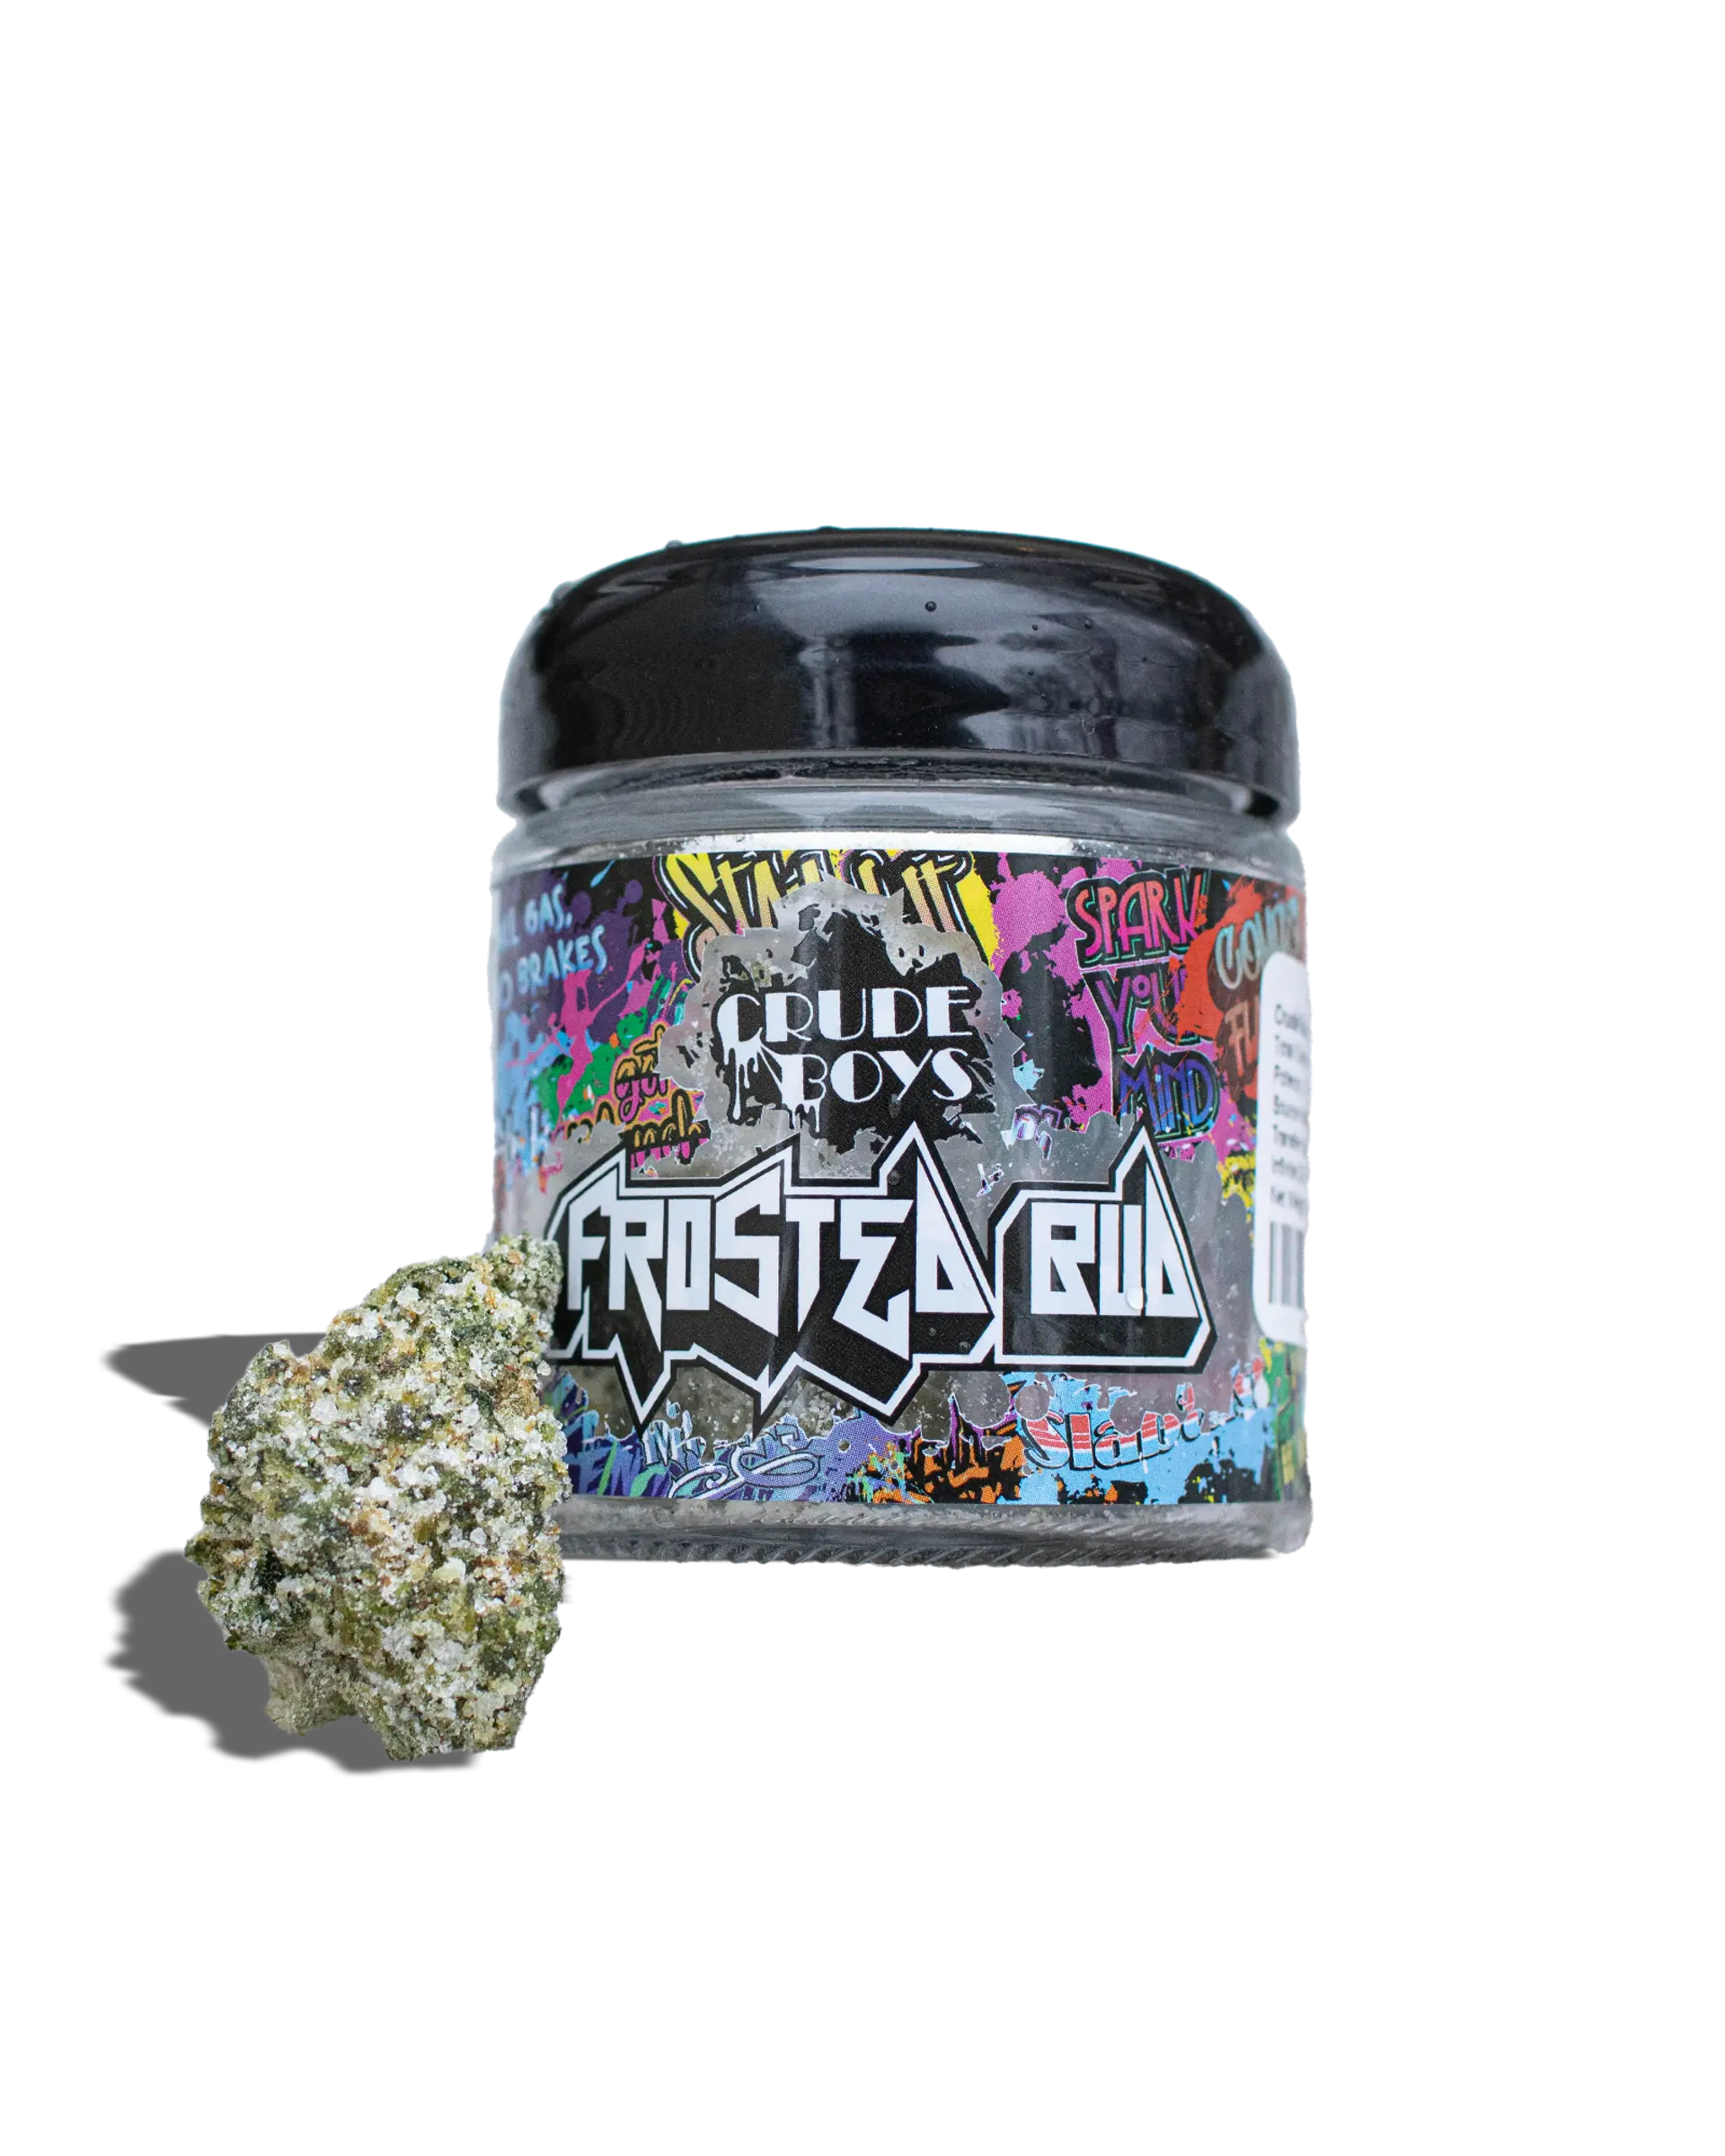 Tacitus Kilgore Frosted Buds 3.5g, 1 of 1